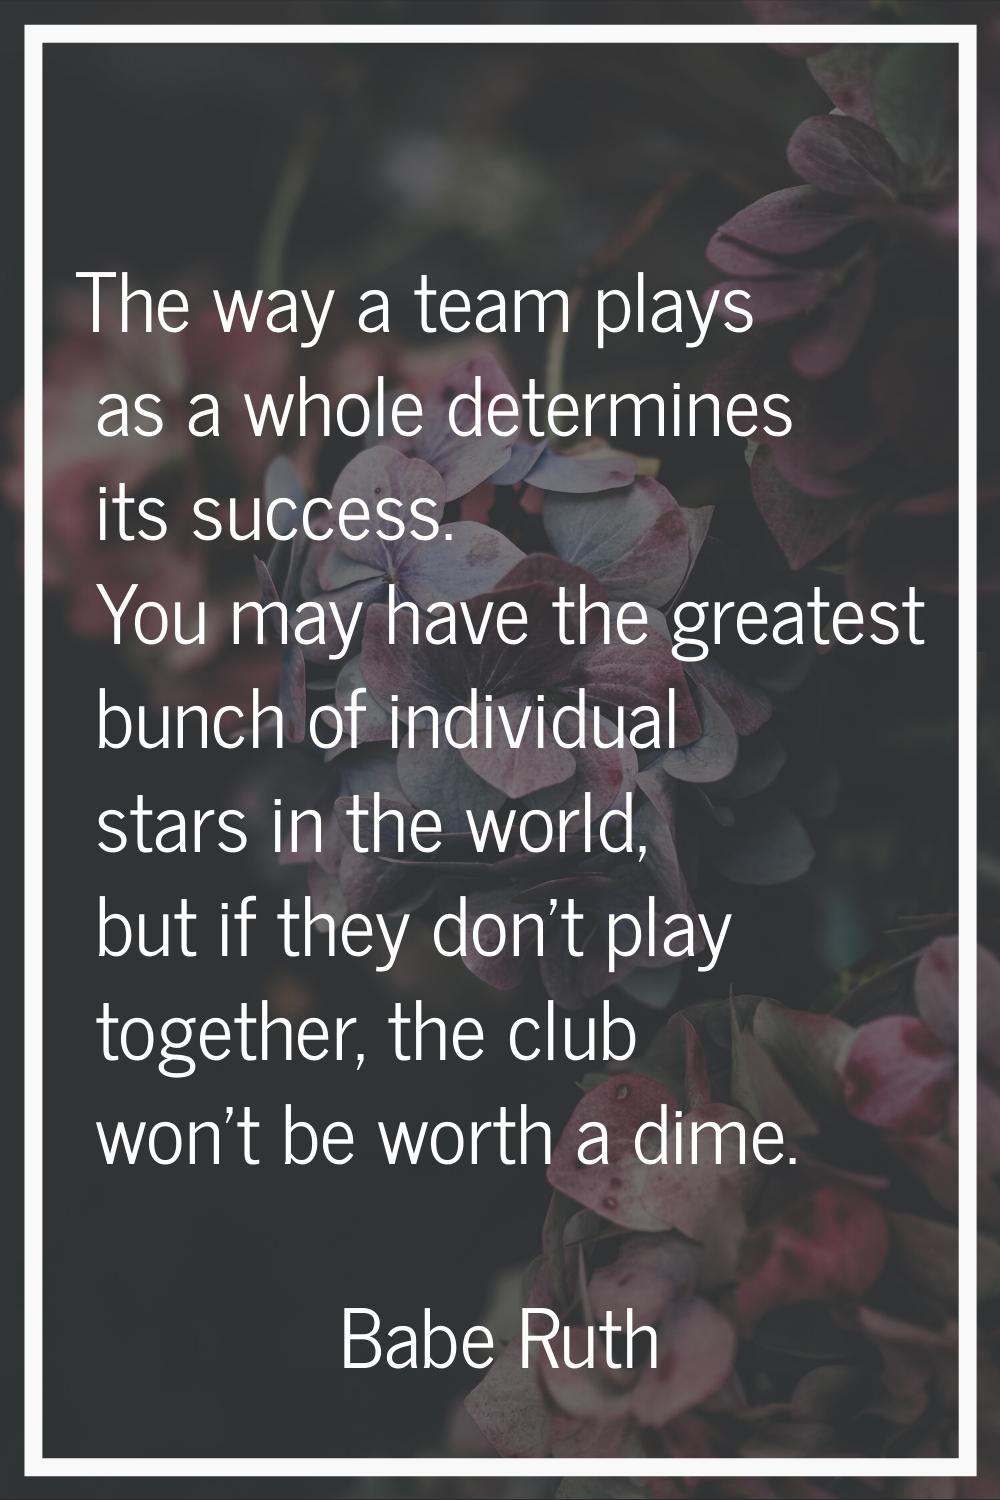 The way a team plays as a whole determines its success. You may have the greatest bunch of individu